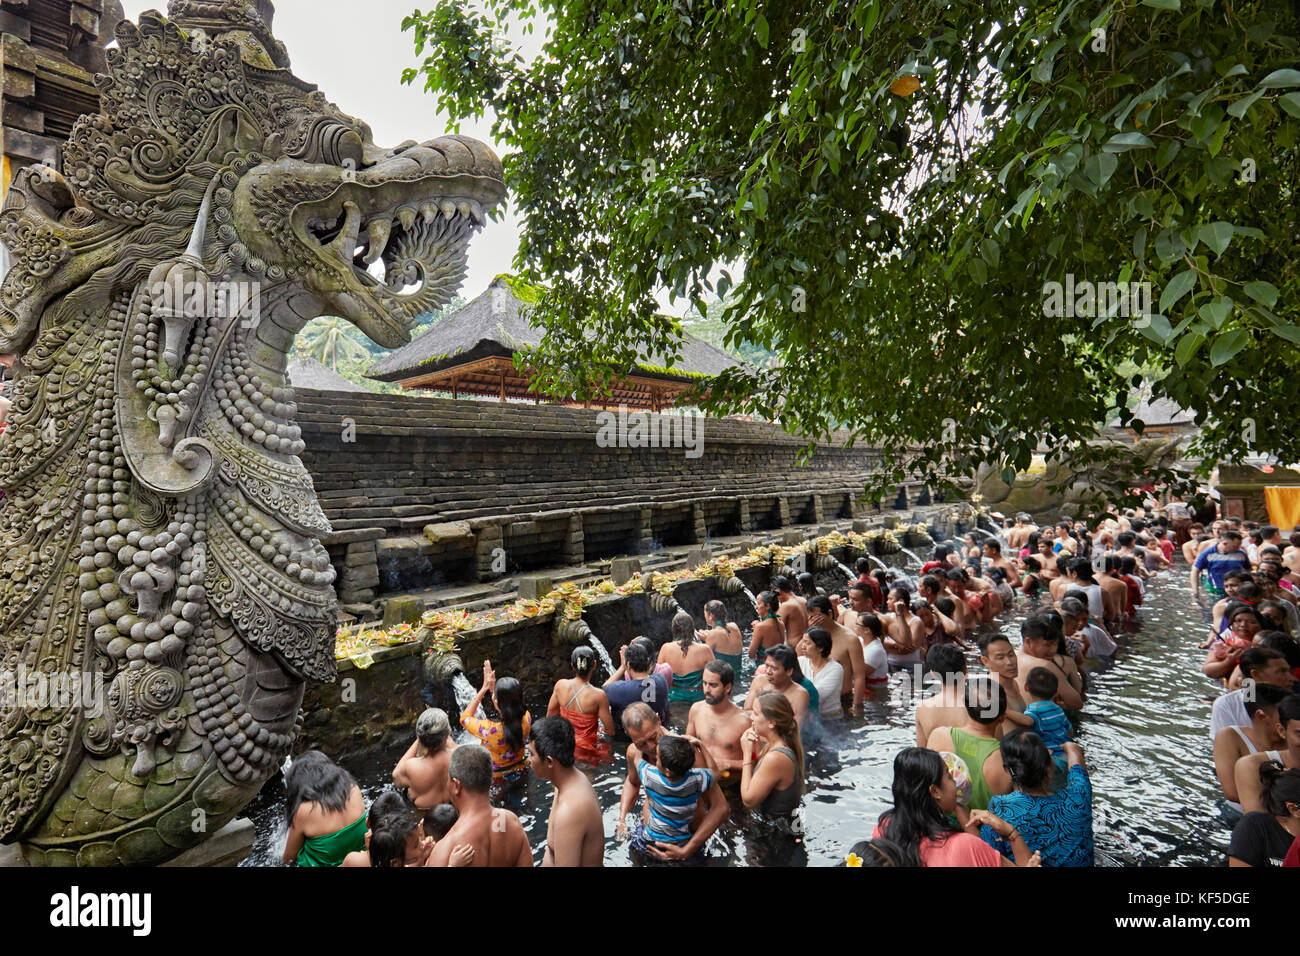 People waiting in line to make ritual purification in the holy spring. Tirta Empul Temple, Tampaksiring, Bali, Indonesia. Stock Photo